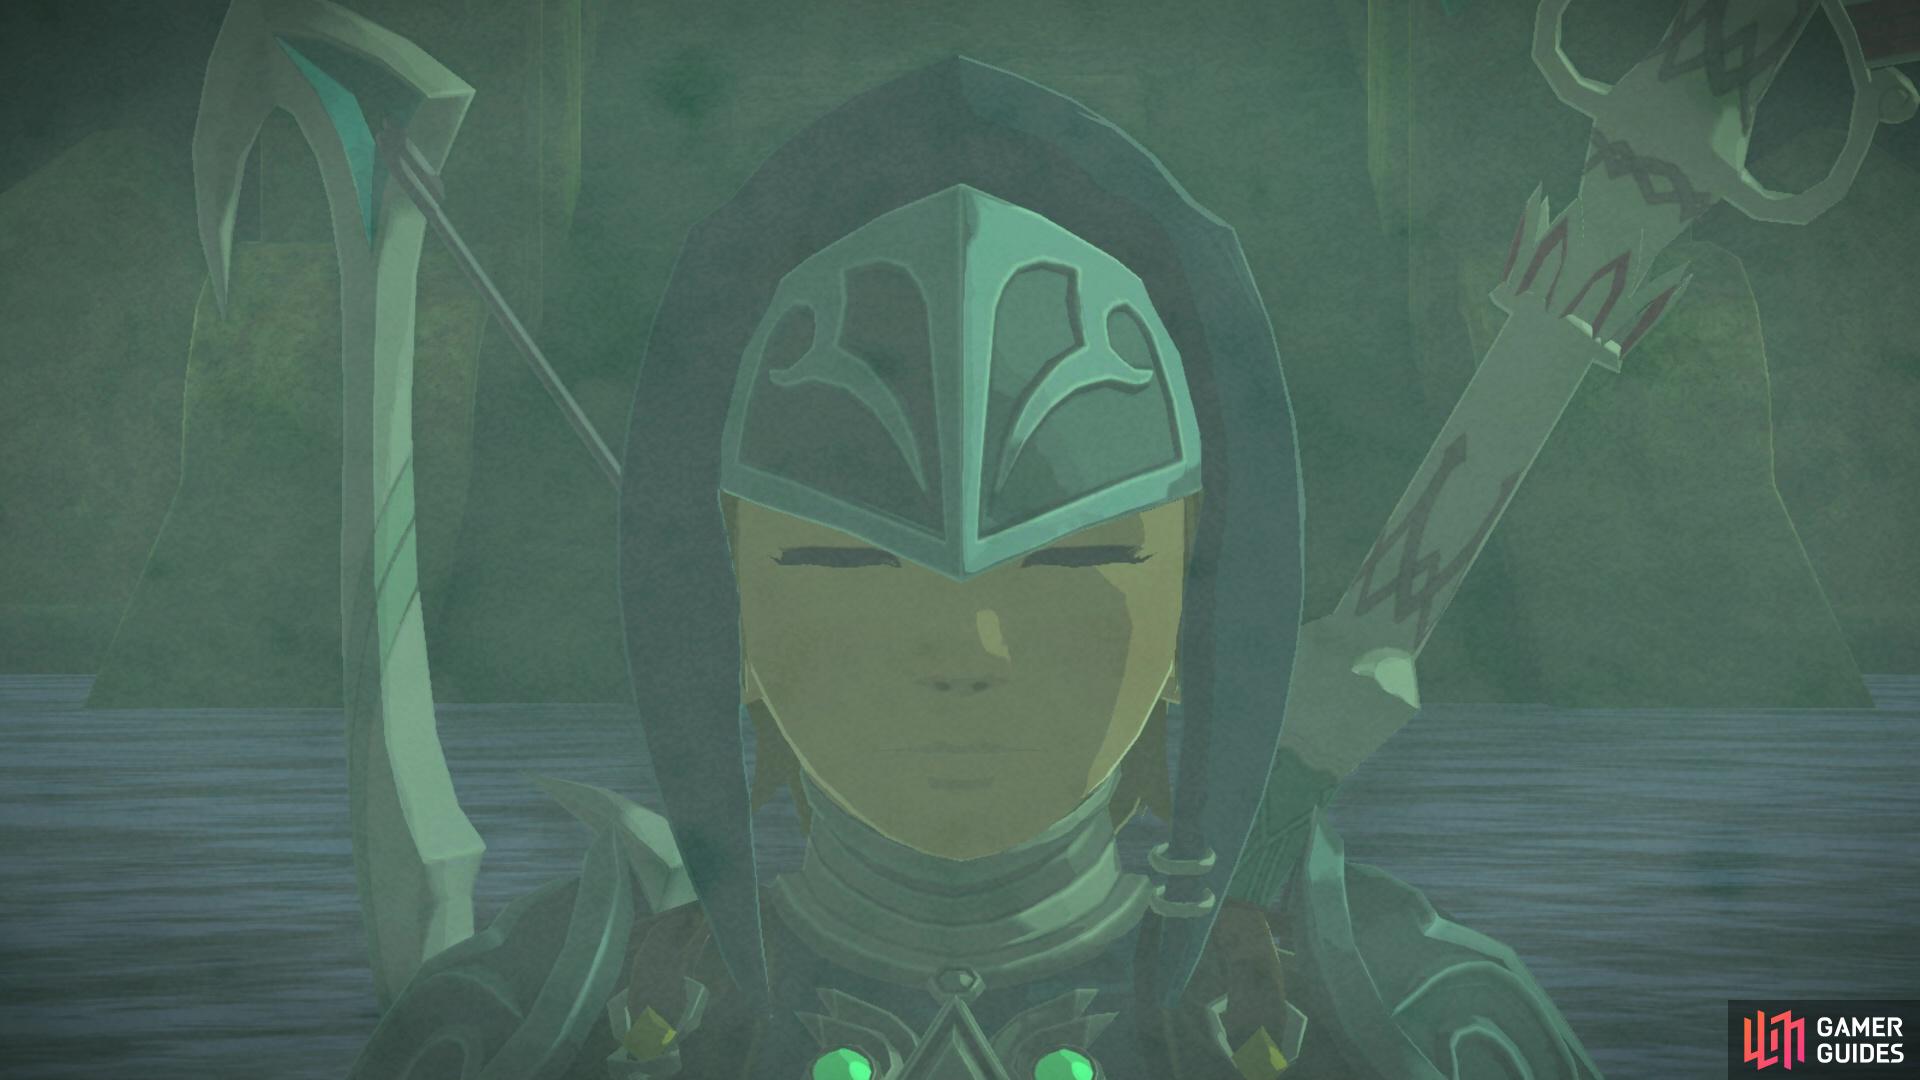 In the Illusory Realm, you’ll be wearing some Zora Armor and wield Zora-style weapons.